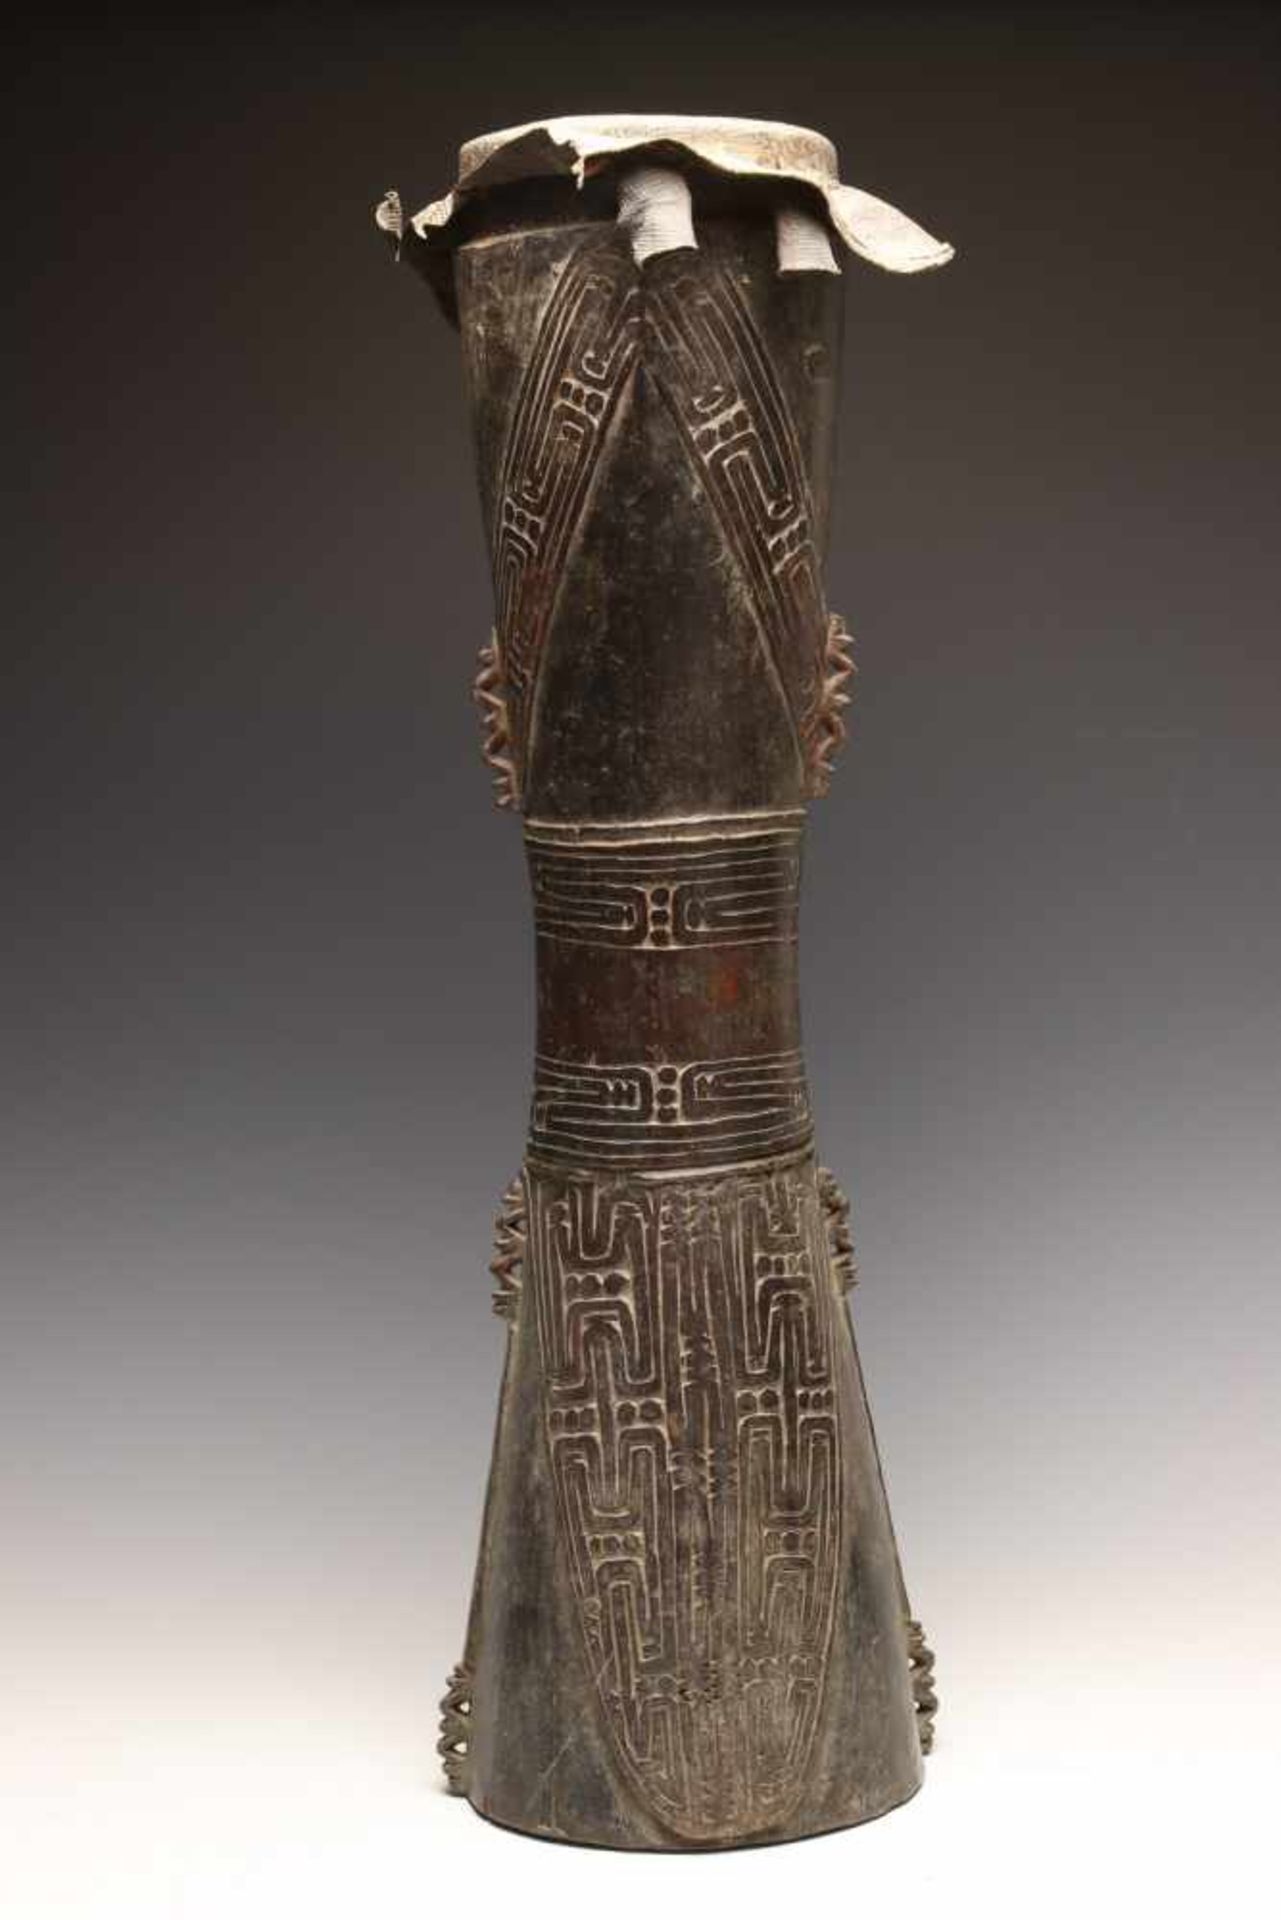 PNG, Lower Sepik, hourglass-shaped drum, the handle on both sides decoratedwith an anthropomorphic - Bild 2 aus 5